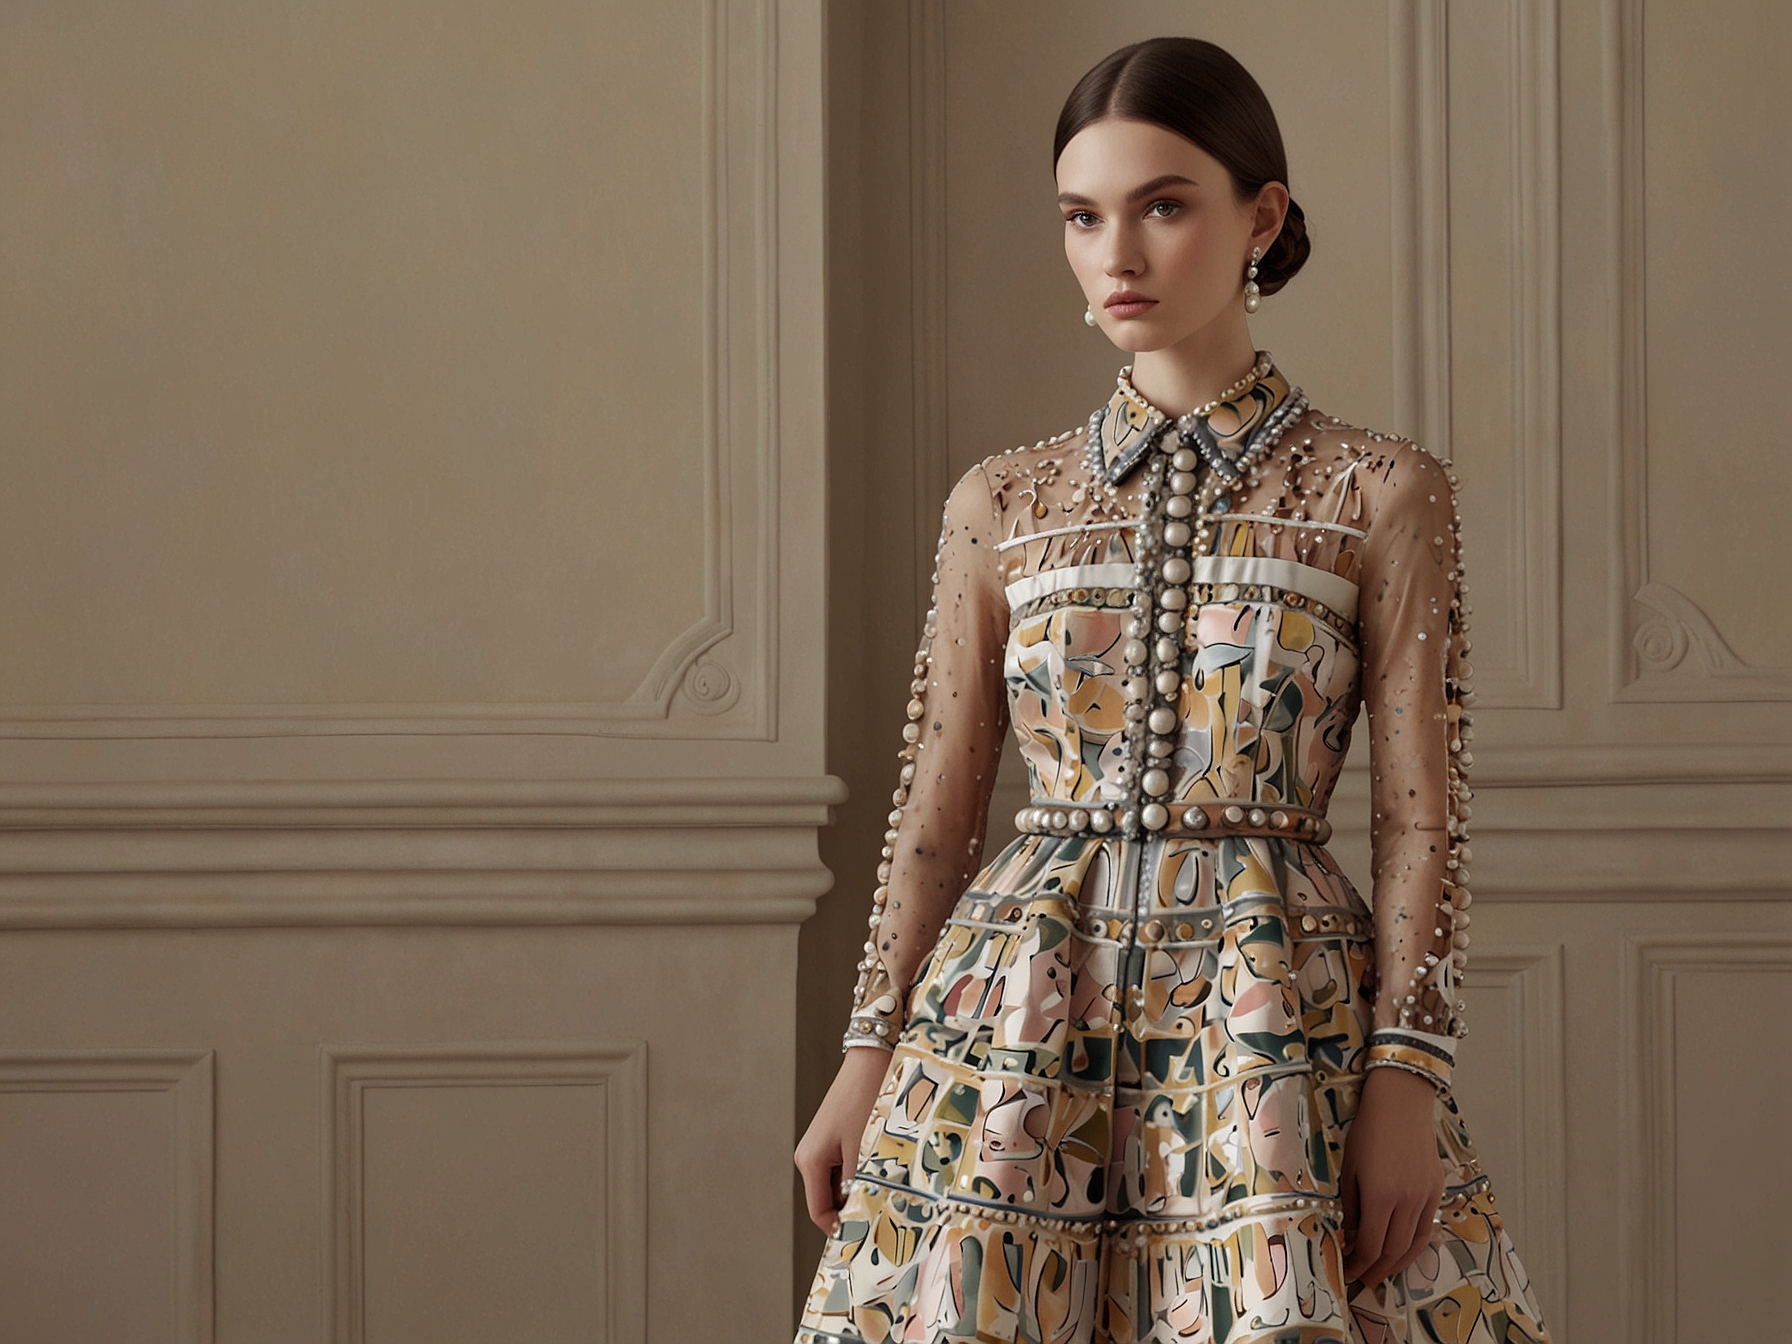 A model in the Valentino Resort 2025 Collection wears a lavishly patterned suit paired with tiered skirts and pearls, evoking '60s and '70s vintage glamour and bohemian elegance.